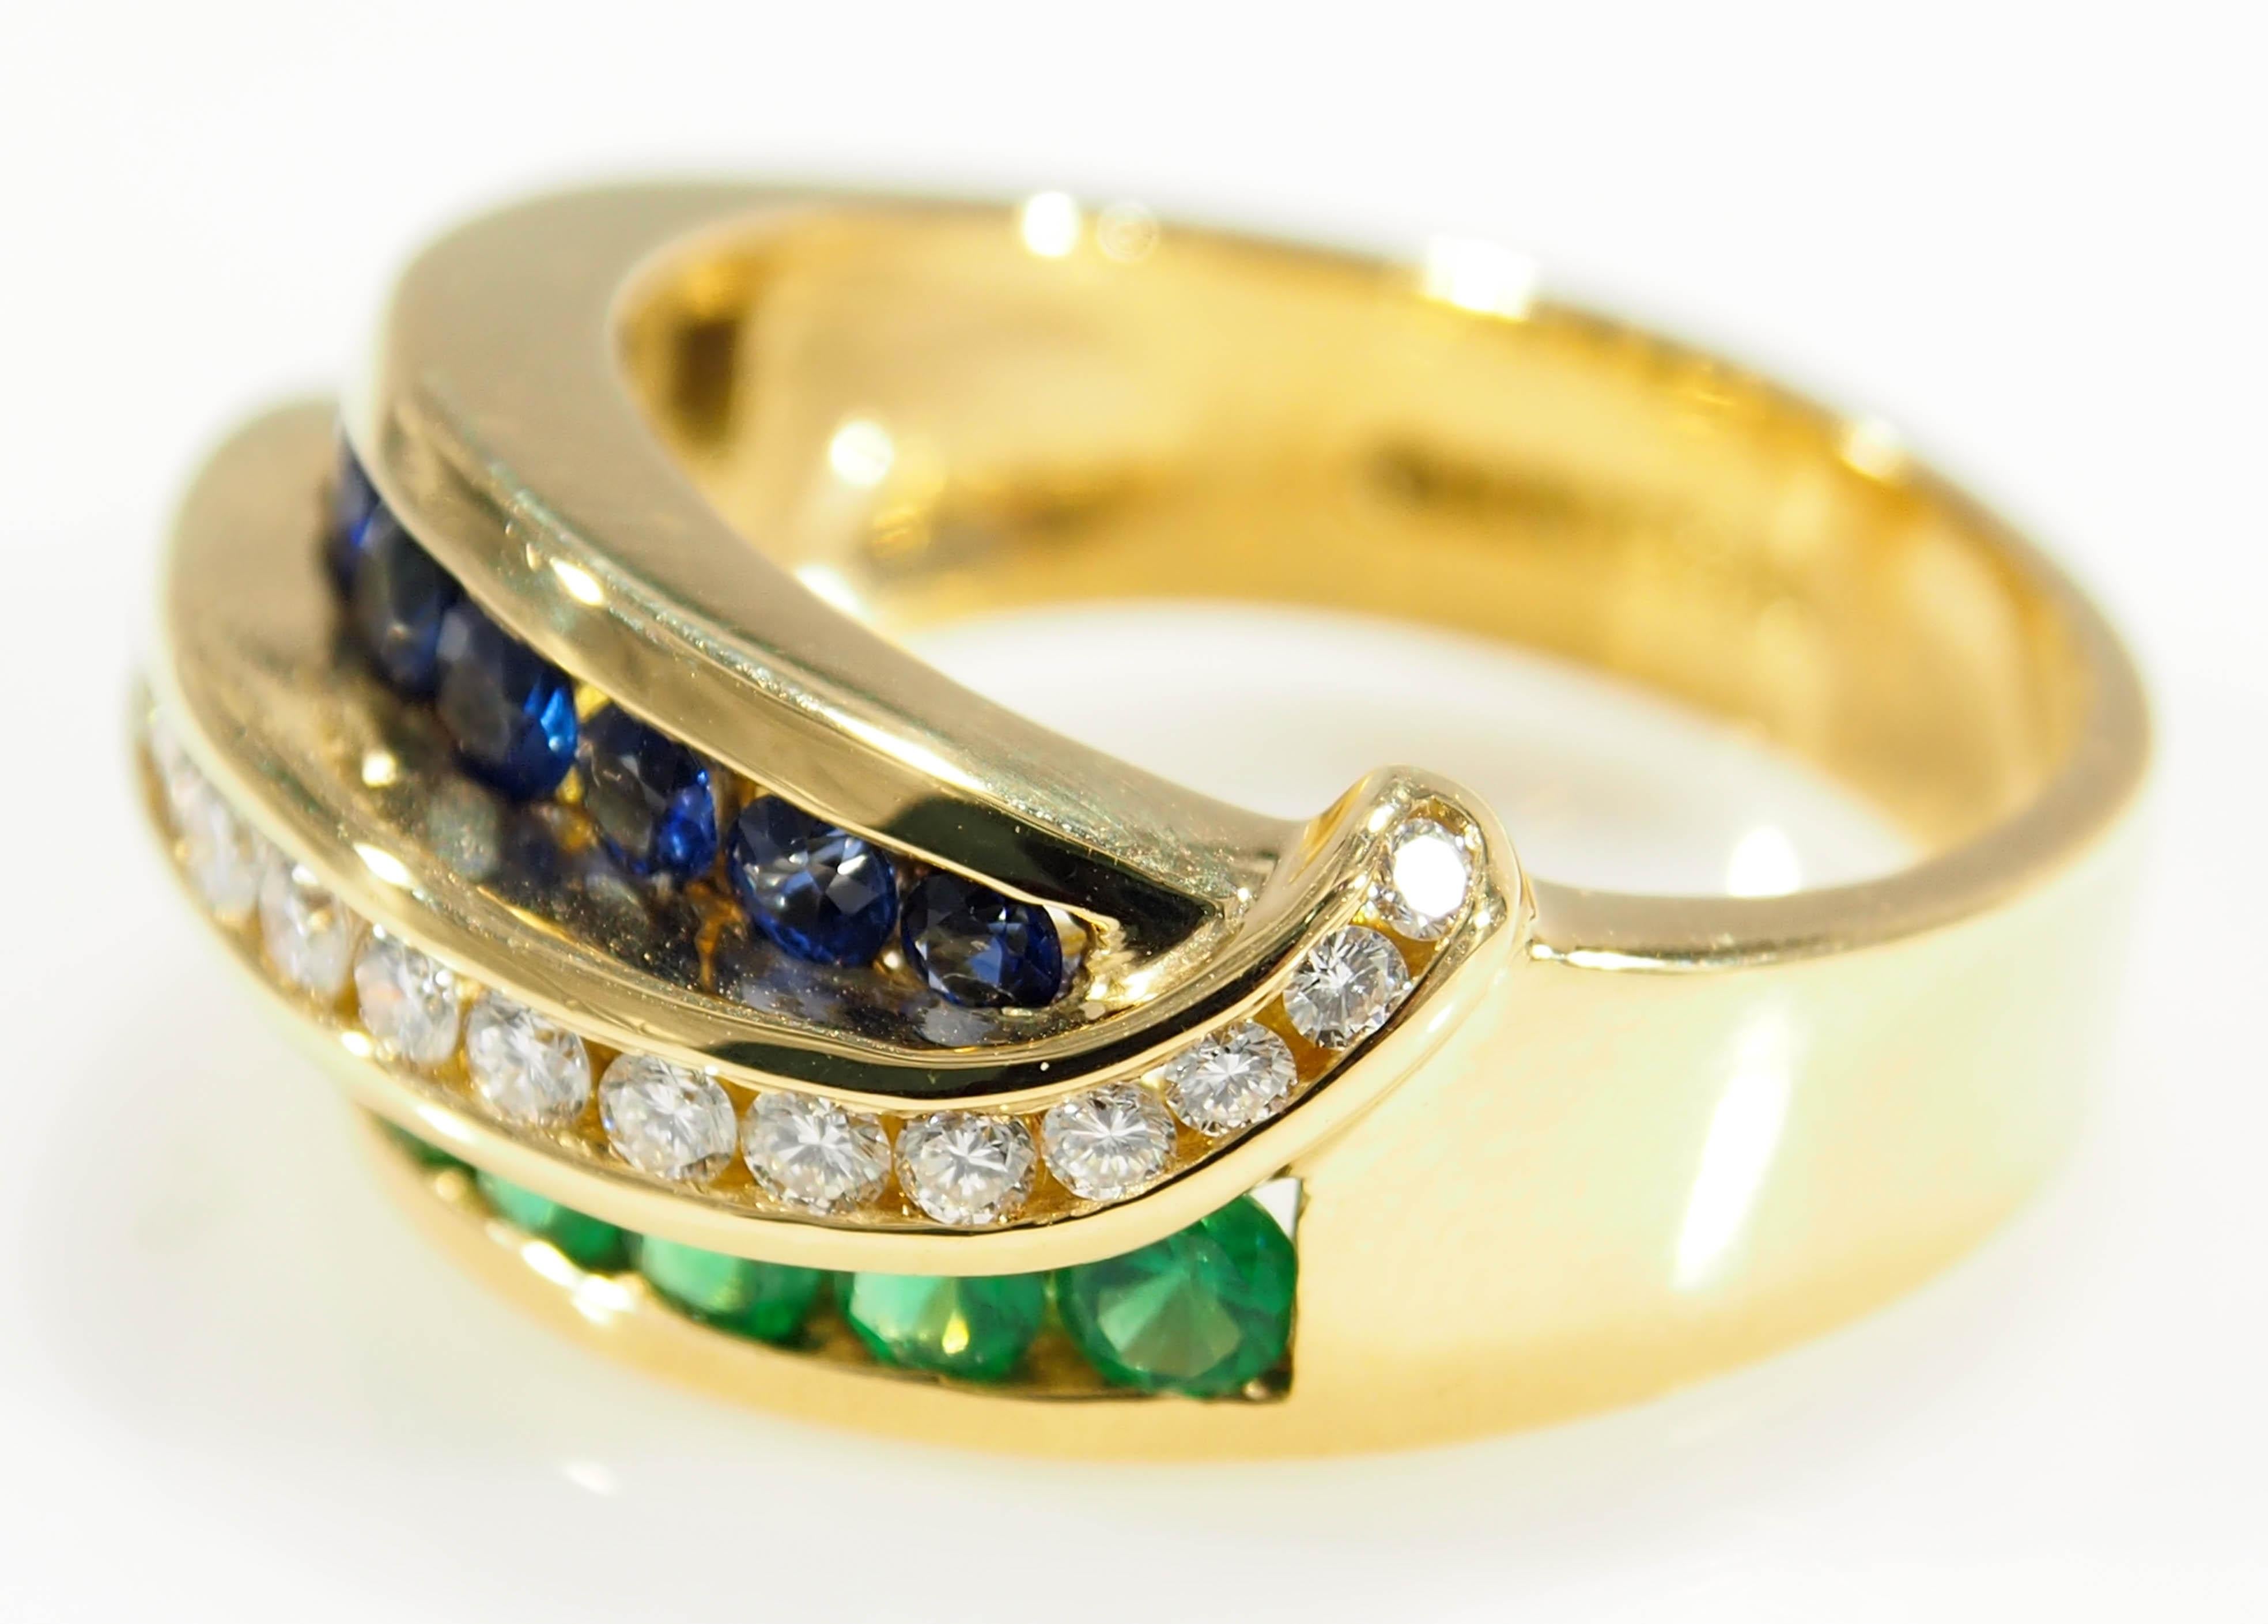 From the talented jewelry artist, Charles Krypell is this lustrous 18 Karat Yellow Gold Ring. A sculpted wave with (21) Round Brilliant Cut Diamonds, G-H in Color, VS in Clarity, 0.21ctw, (9) Sapphires, 0.27ctw, and (9) Emeralds, 0.27ctw. This is a